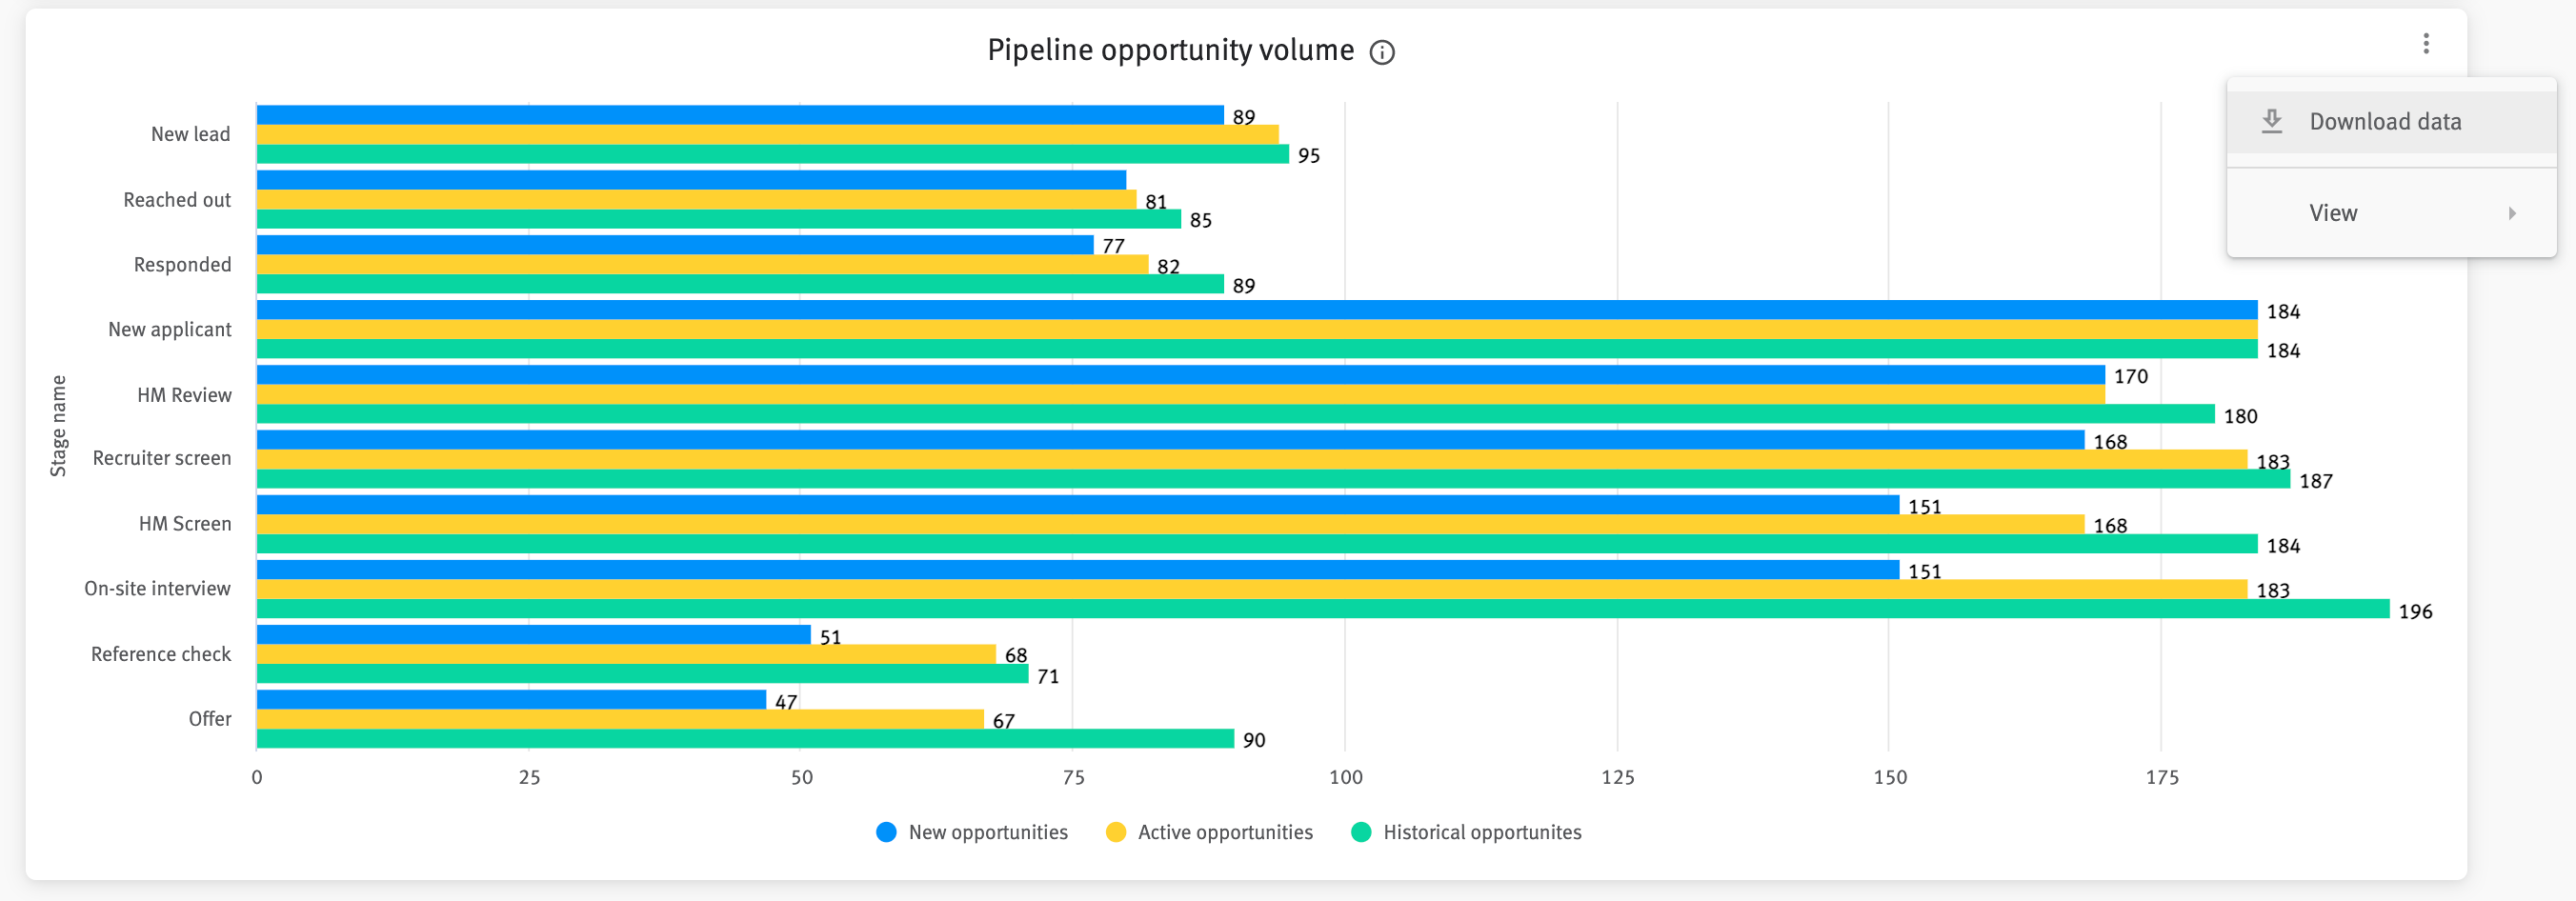 Pipeline opportunity volume chart with Download data button extended from upper right corner.